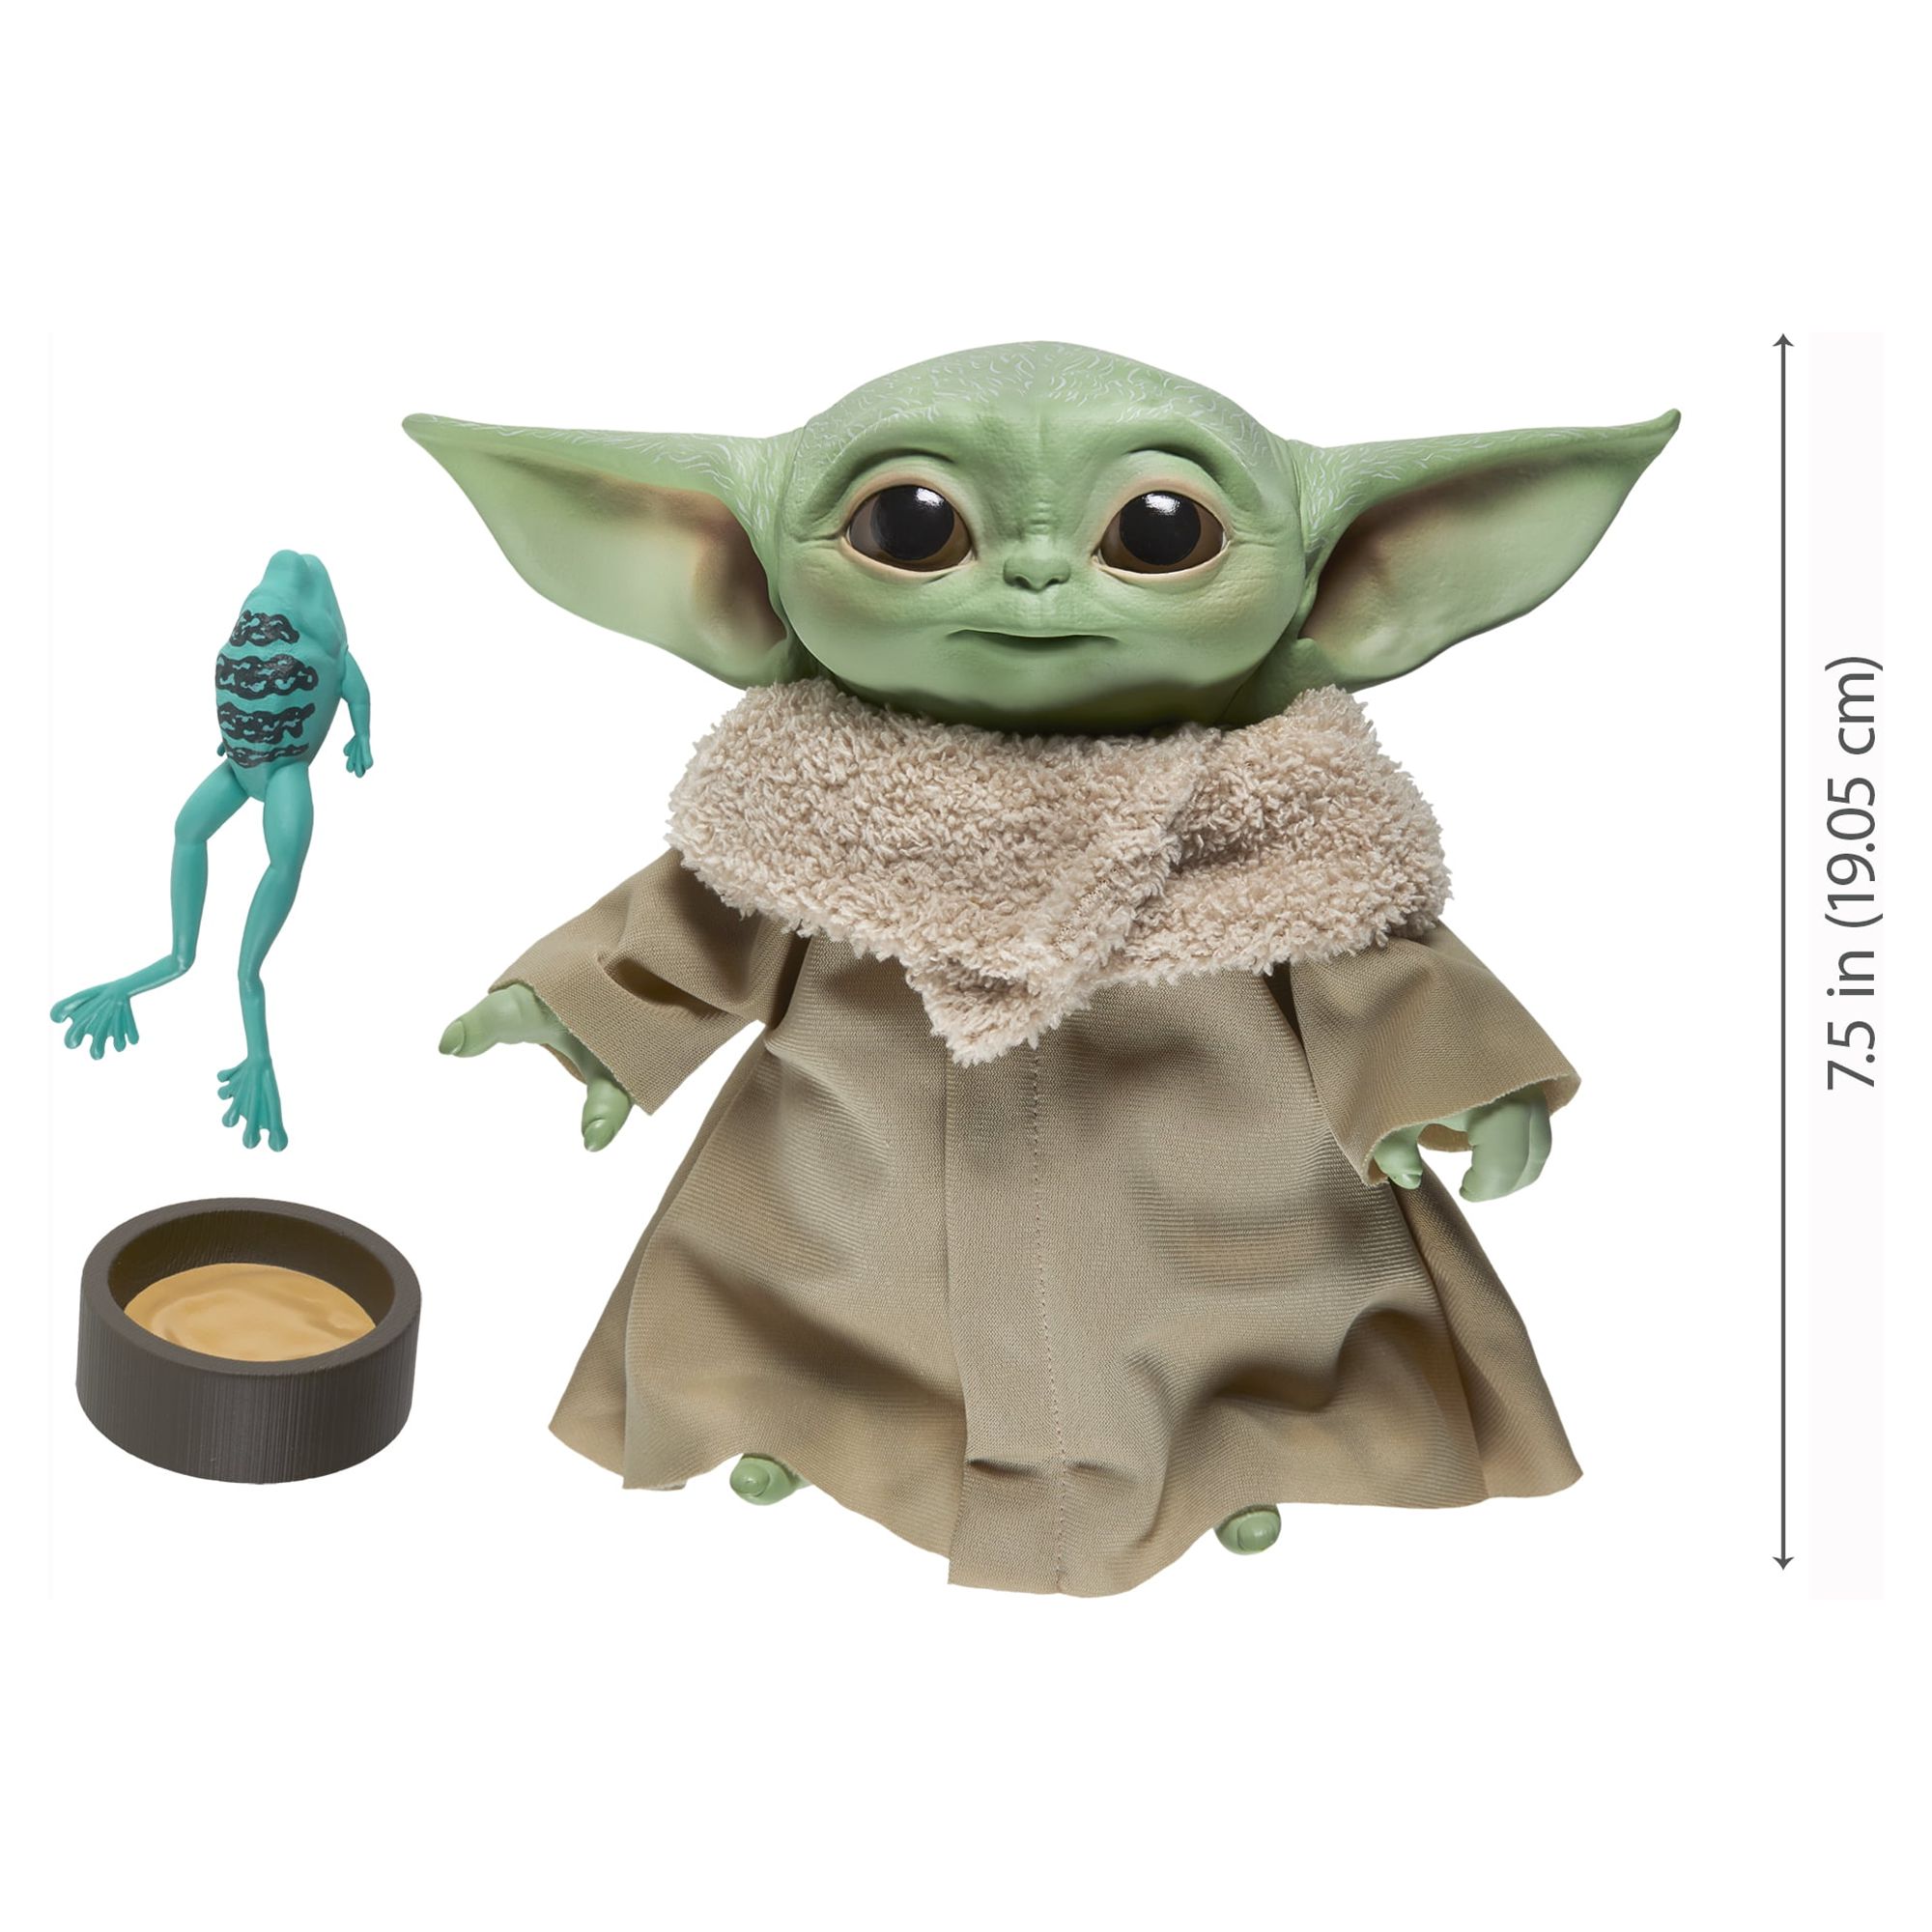 Star Wars The Child Talking Plush Toy - image 1 of 7